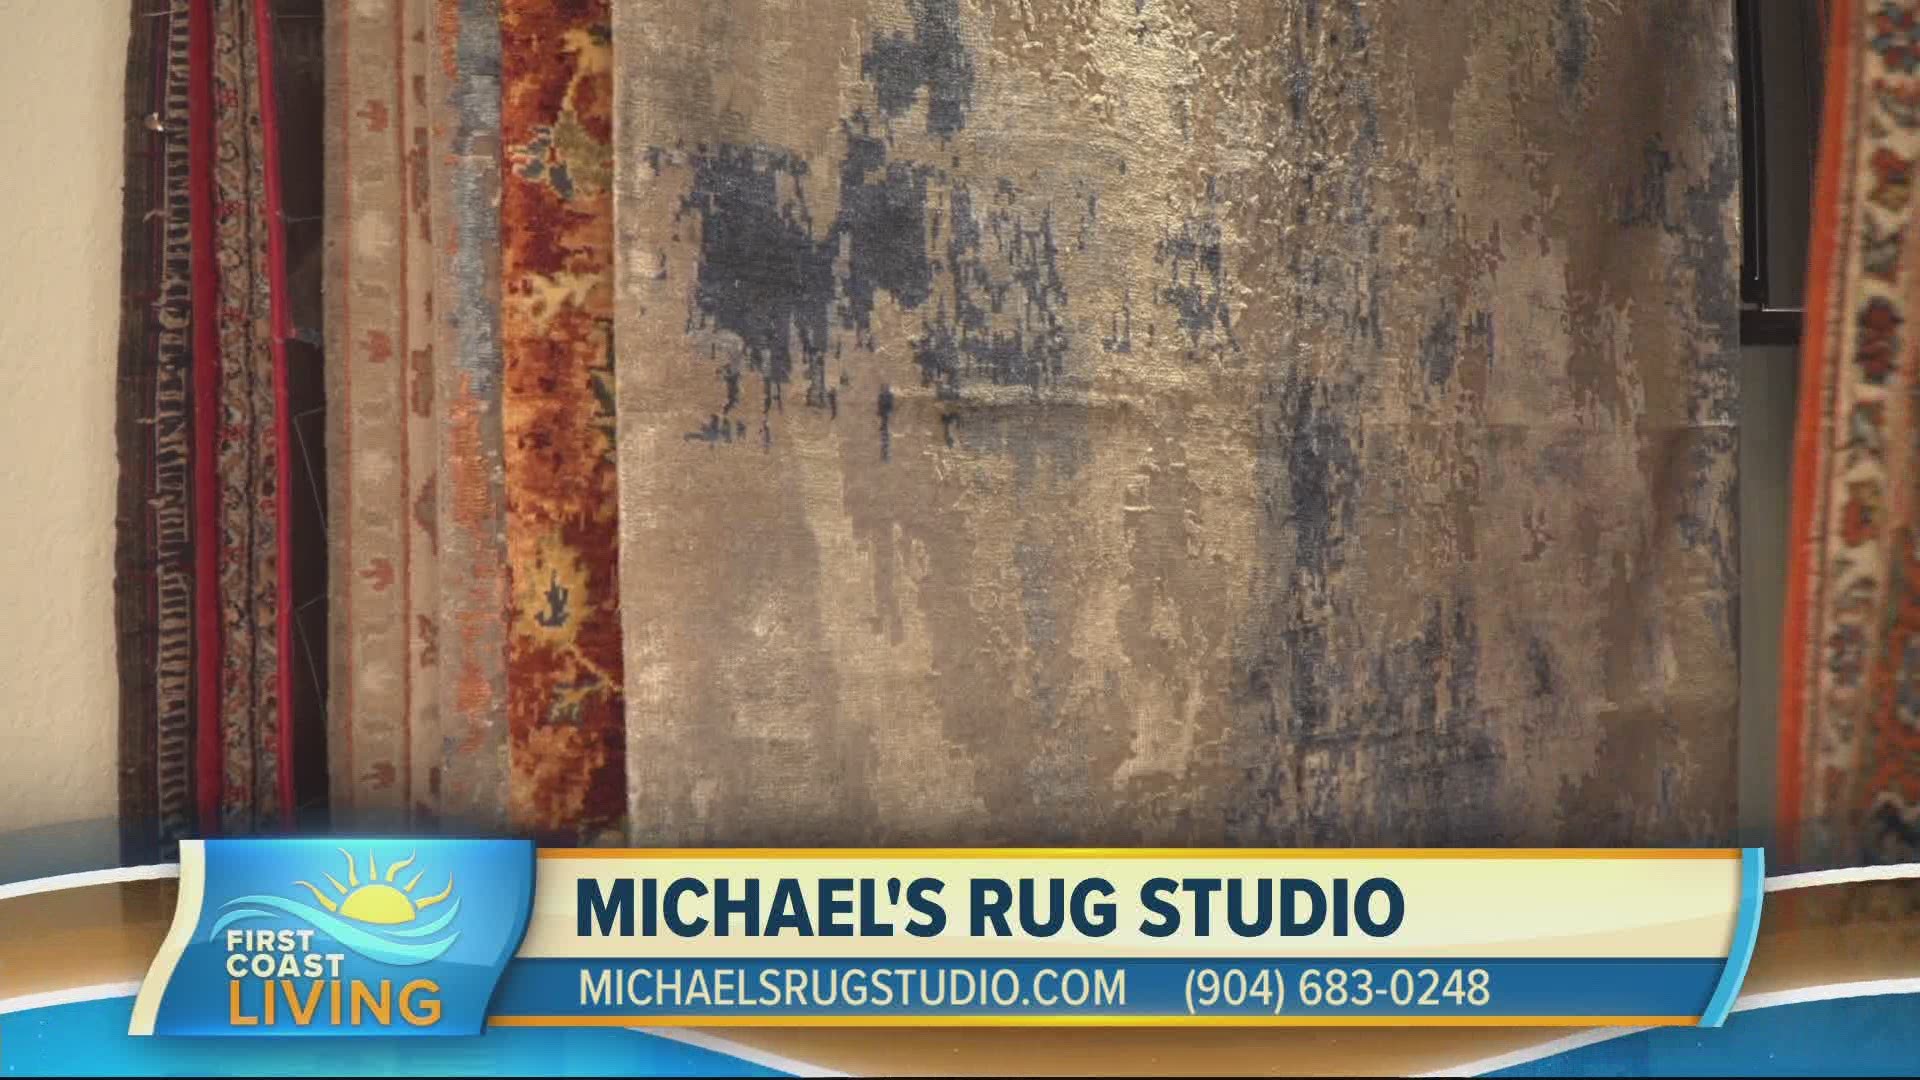 Michael's Rug Studio offers a wide variety of beautiful rugs!